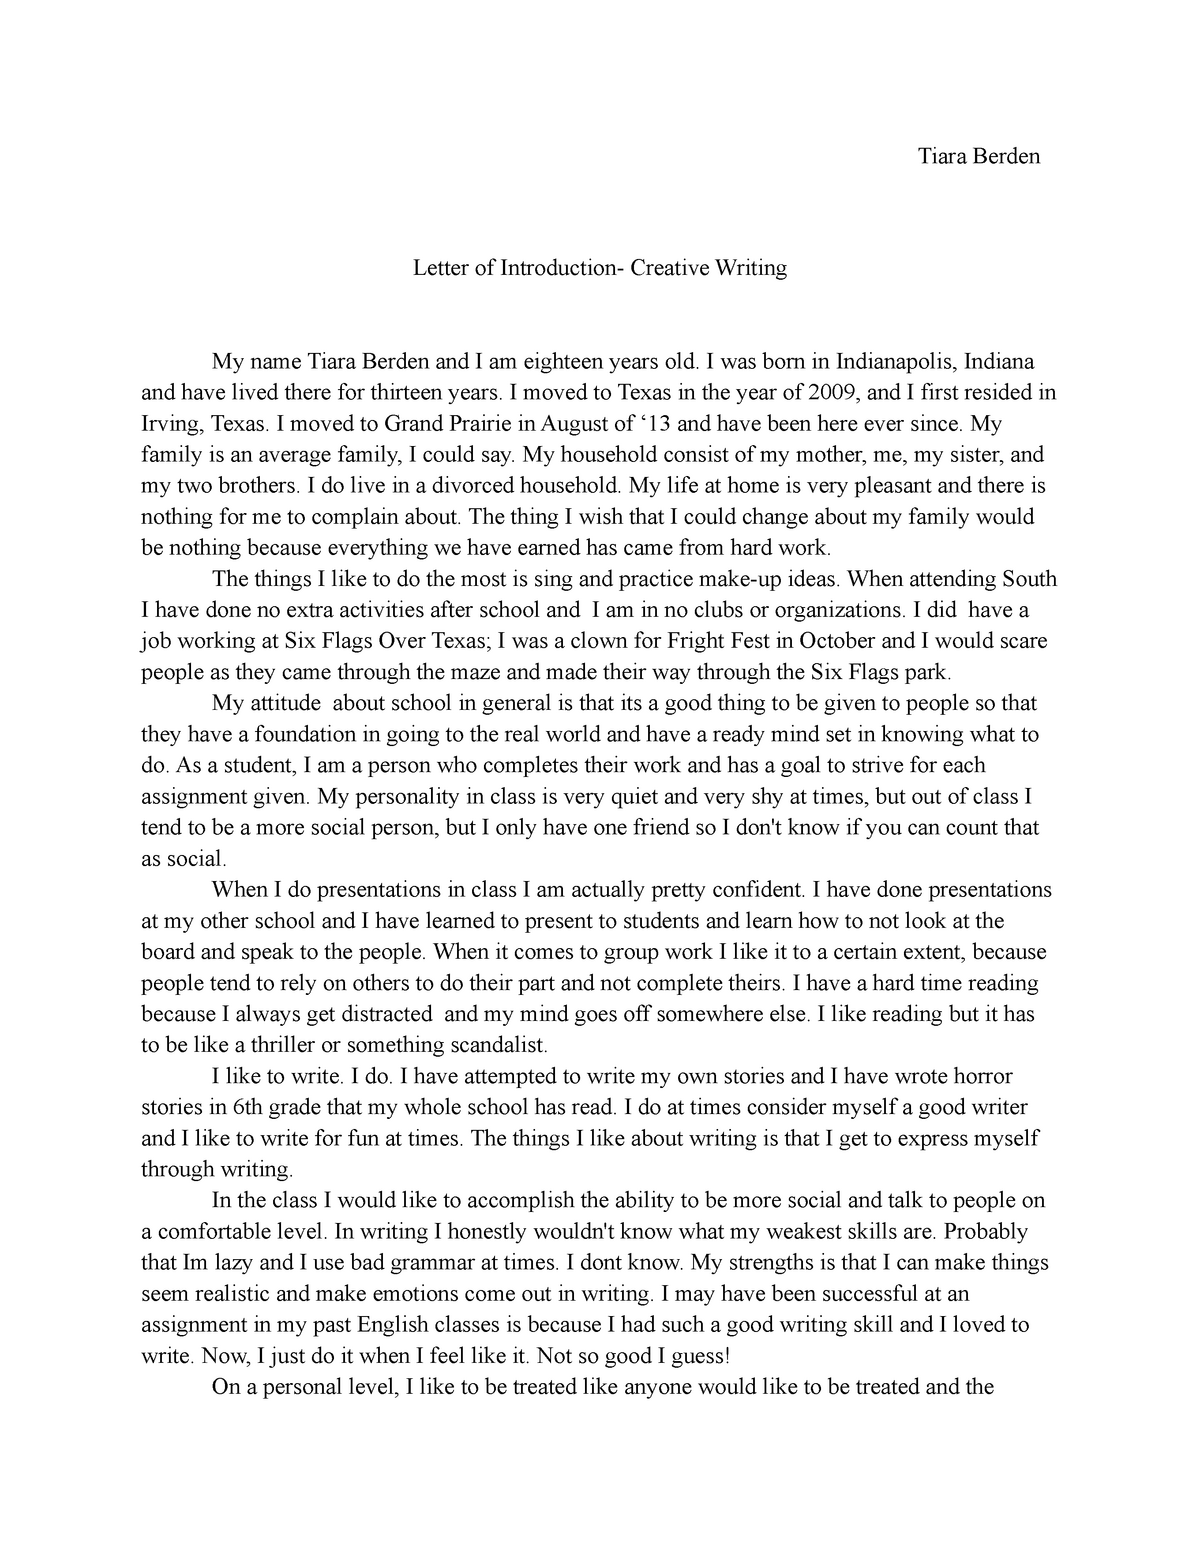 Letter of Introduction- Speech - Tiara Berden Letter of Introduction ...